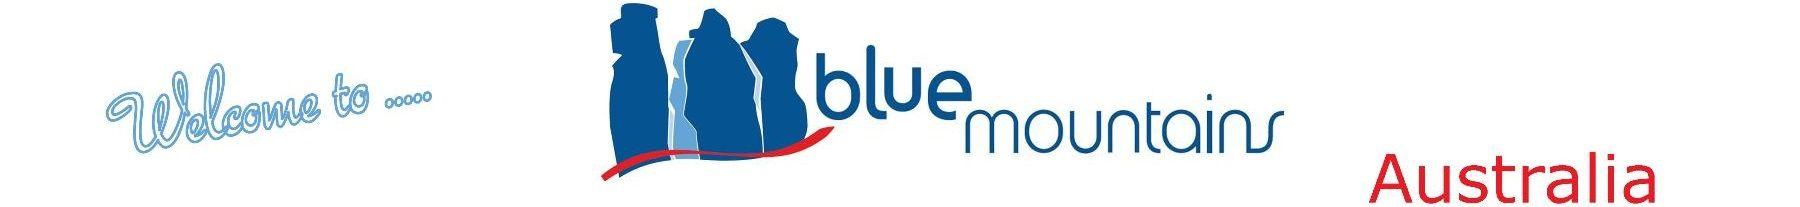 Pink and Blue Mountains Brand Logo - Your Complete Blue Mountains Guide | Visit the Blue Mountains